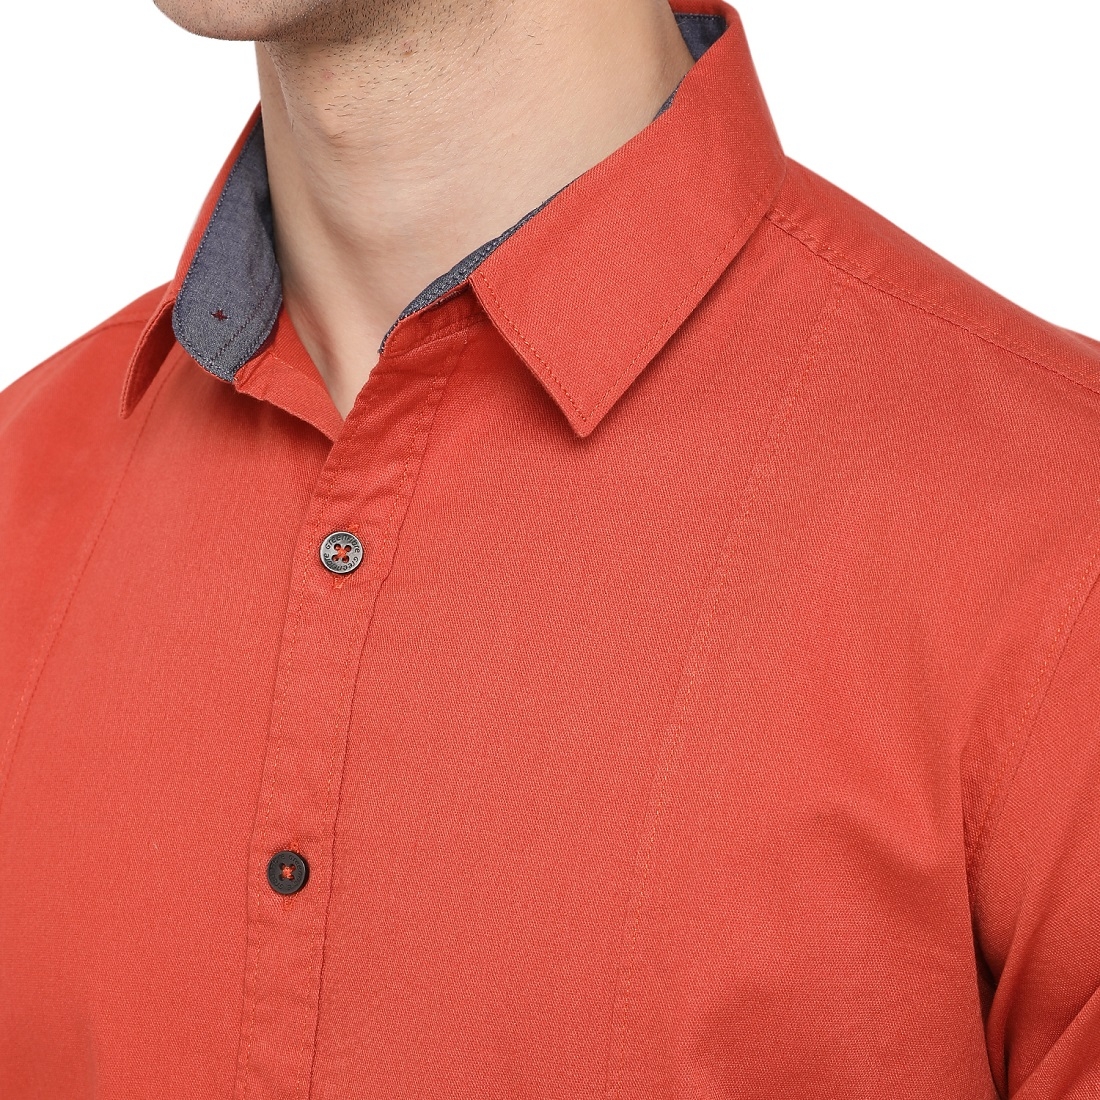 Greenfibre | Spicy Orange Solid Slim Fit Casual Shirt | Greenfibre 4